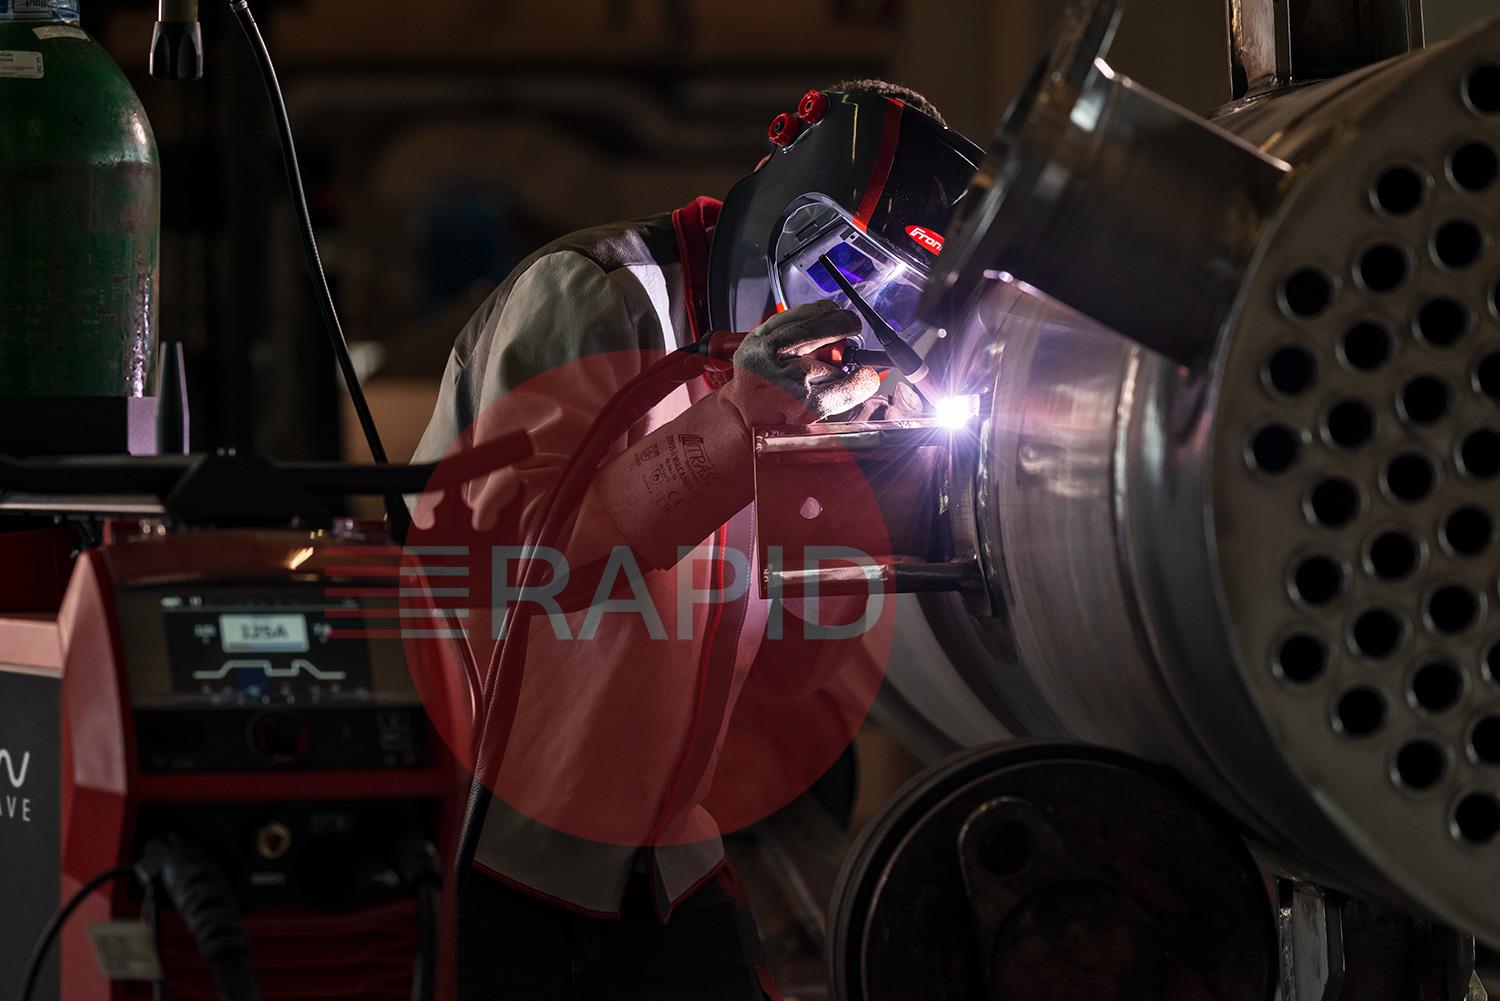 4,075,252PKGW  Fronius - iWave 500i AC/DC Water-Cooled TIG Welder Package, 400v, THP 500i TIG Torch & Earth